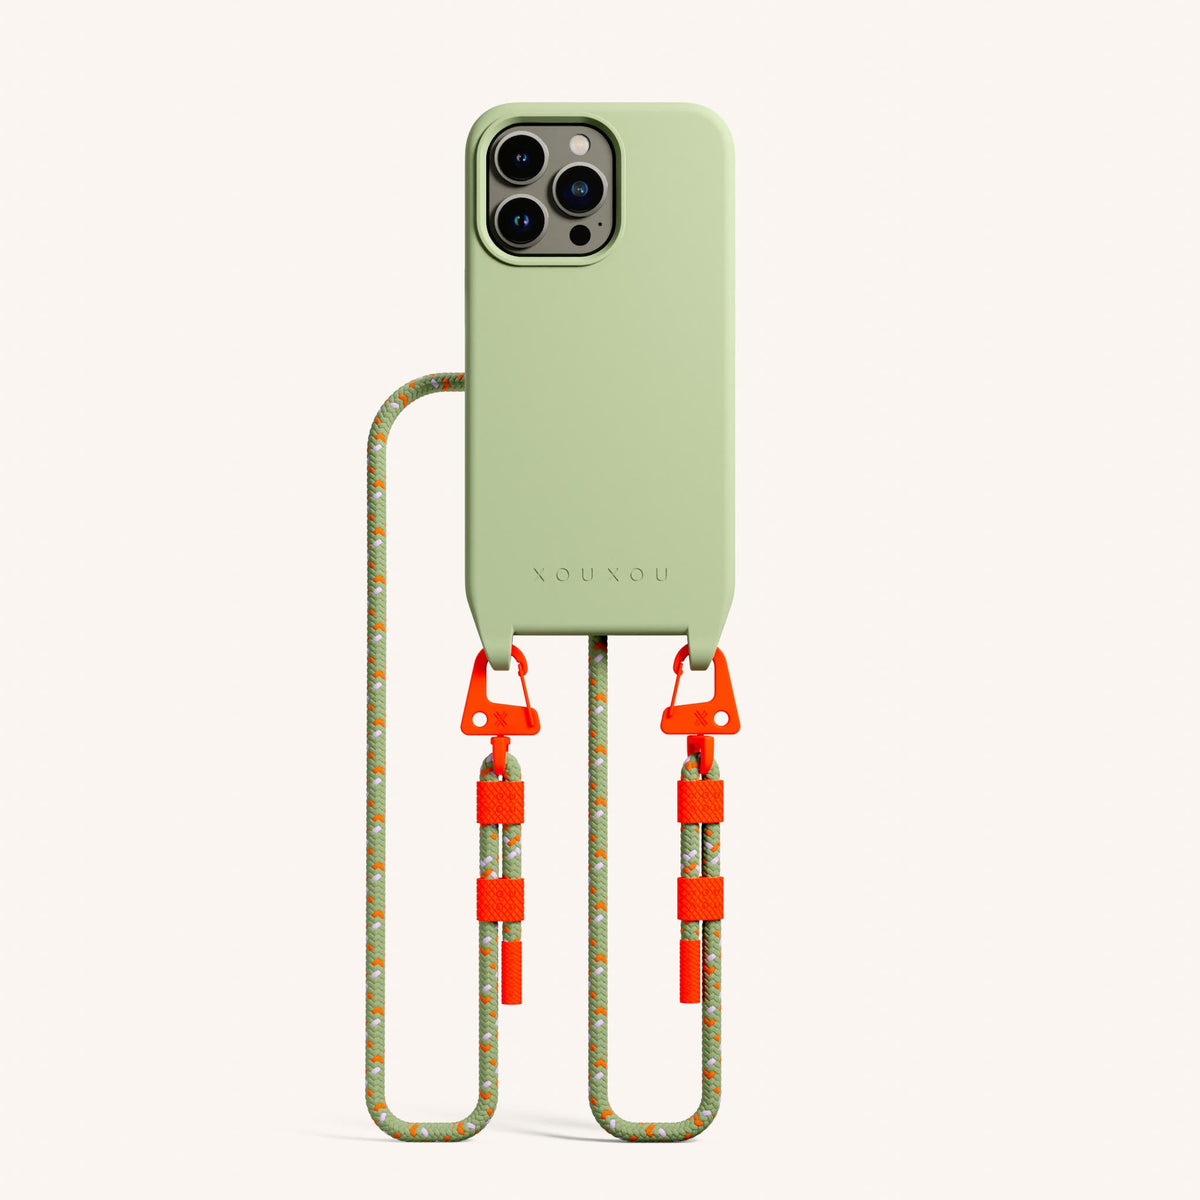 Phone Necklace with Carabiner Rope for iPhone 13 Pro with MagSafe in Light Olive + Orange Camouflage Total View | XOUXOU #phone model_iphone 13 pro